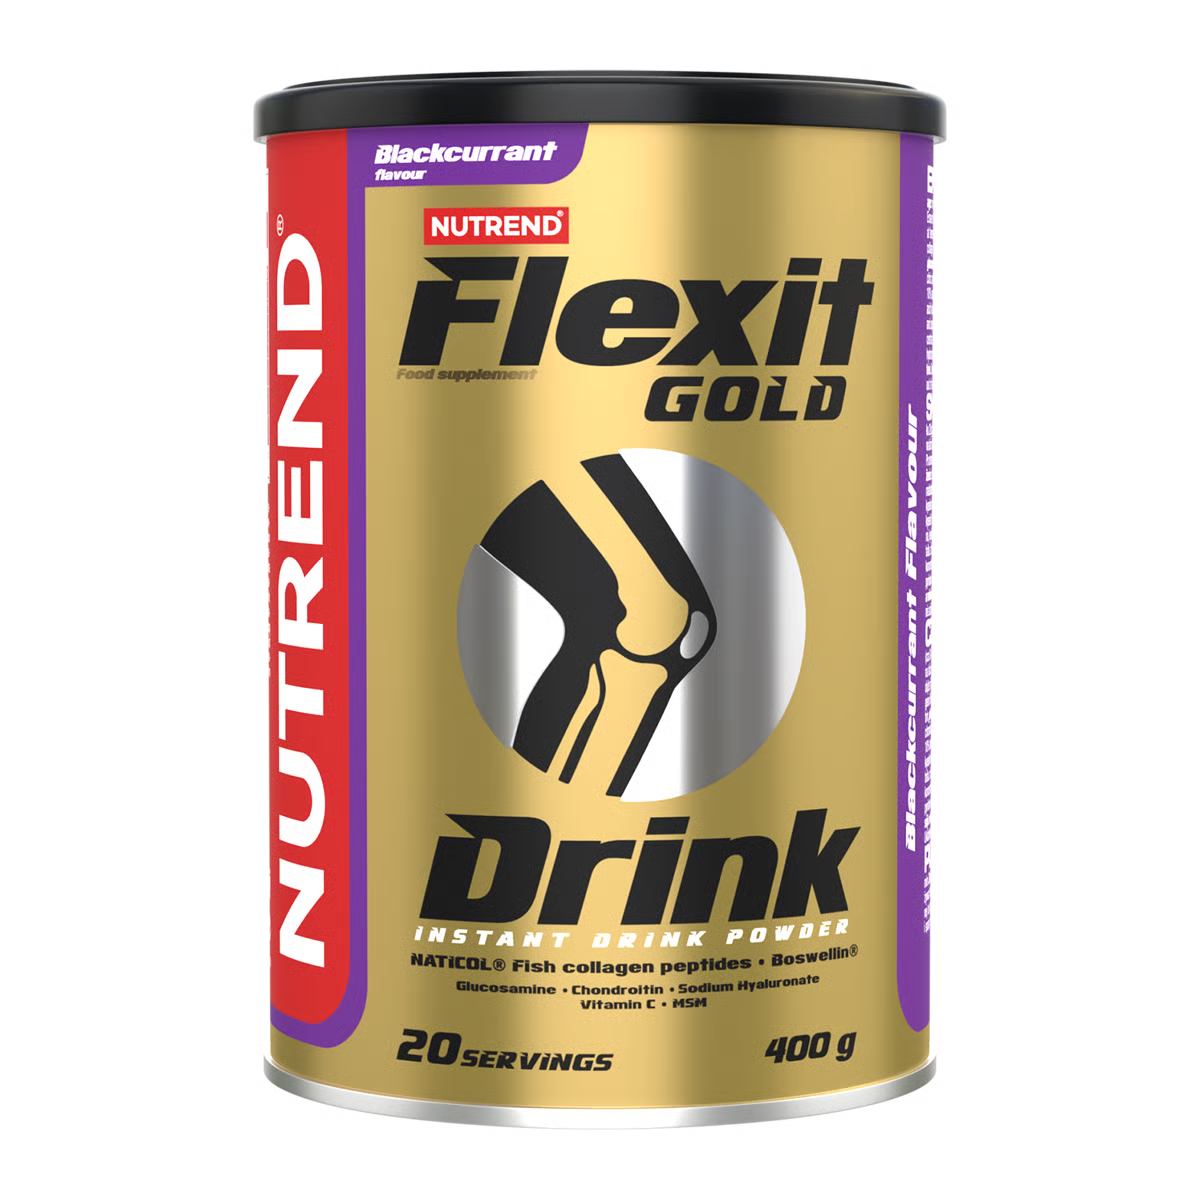 Nutrend Flexit Gold Drink 400g - фото 1 - id-p527960051